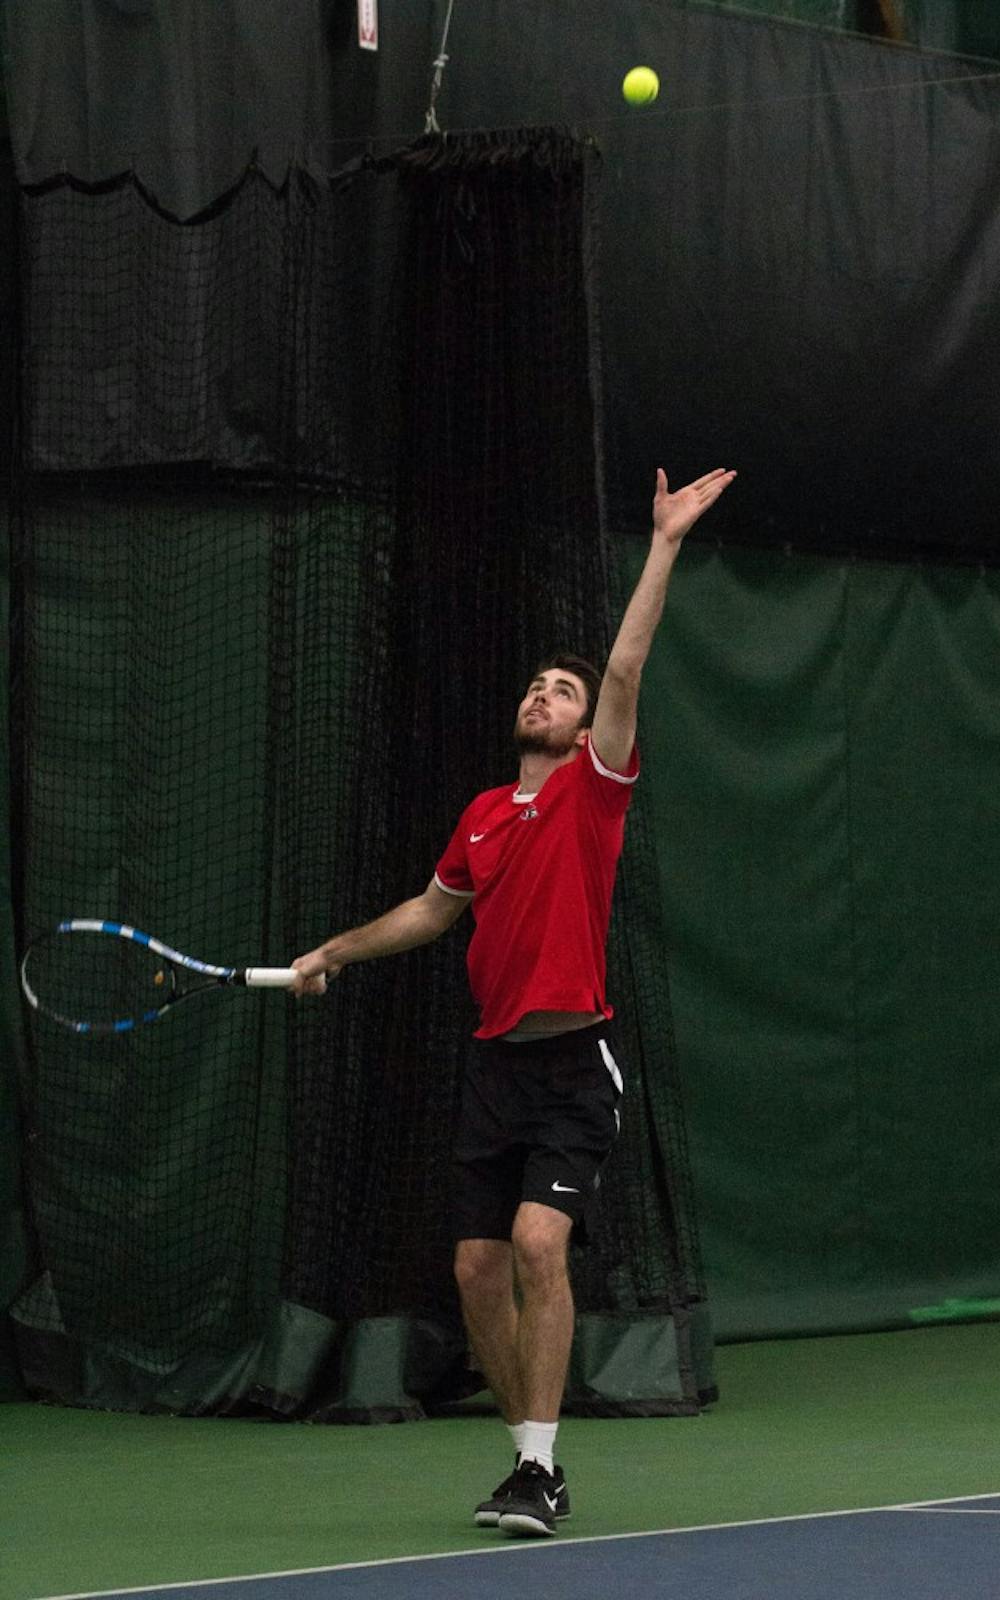 Sophomore Tom Carney prepares to serve the ball during his doubles match with teammate Matt Helm against Eastern Illinois' Jared Woodson and Freddie Ammer on Jan. 22 at Muncie's Northwest YMCA. The Cardinals won 6-1. Grace Ramey // DN